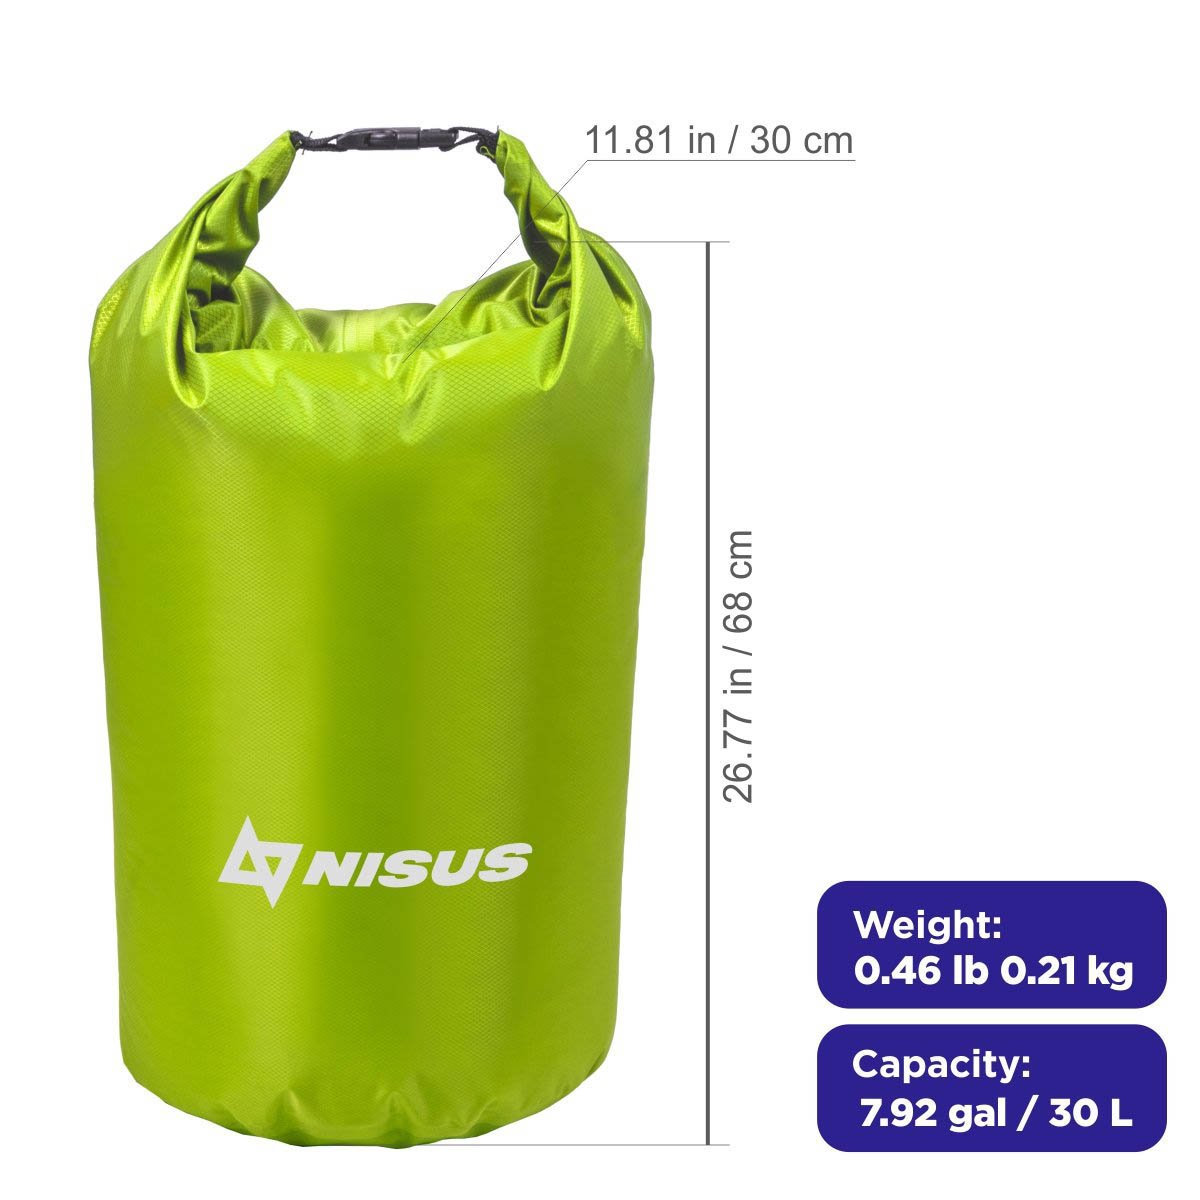 30 L Green Polyester Waterproof Dry Bag for Fishing, Kayaking is 27 inches high nad weighs 0.46 lbs